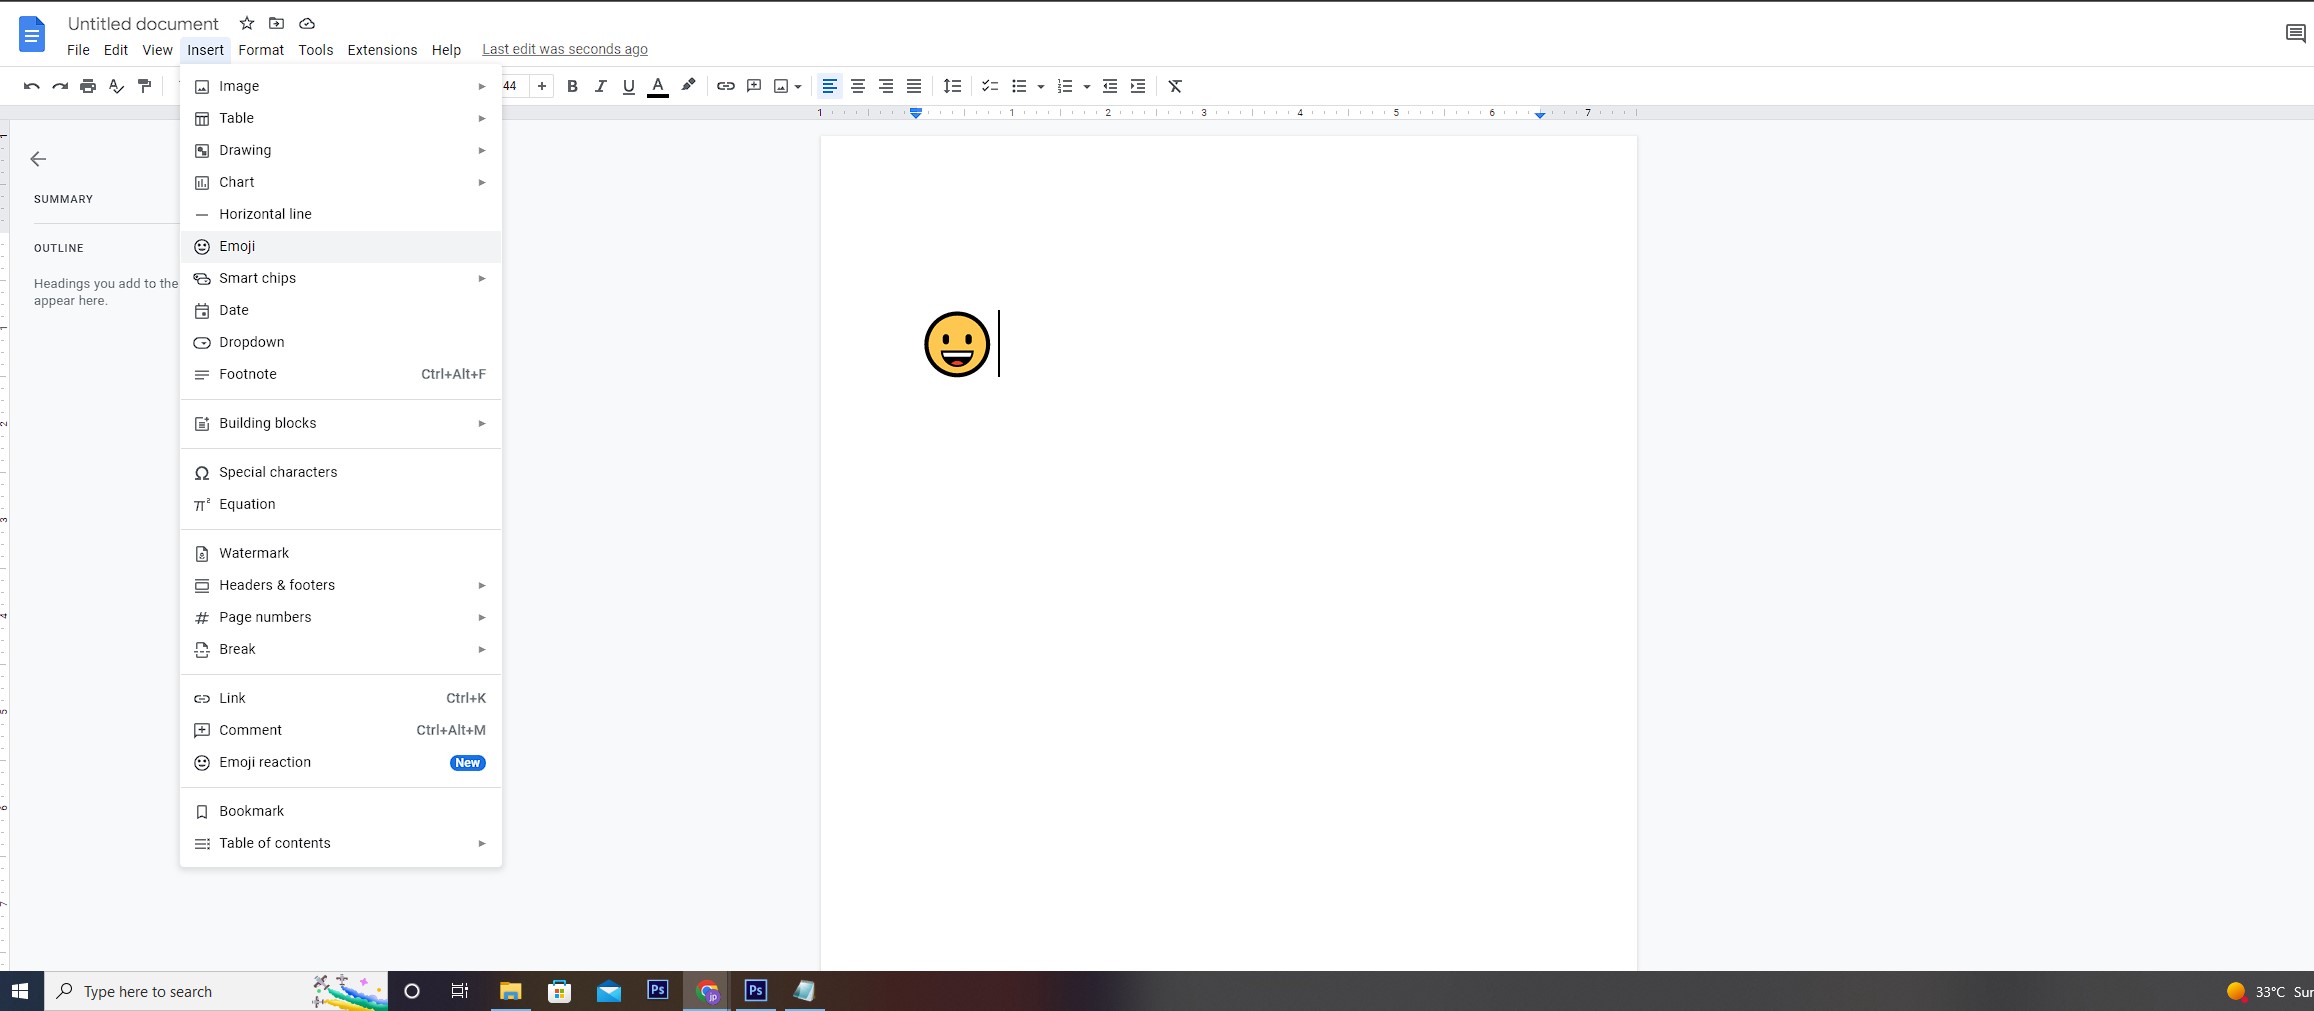 How to Add Emojis to Google Docs Files